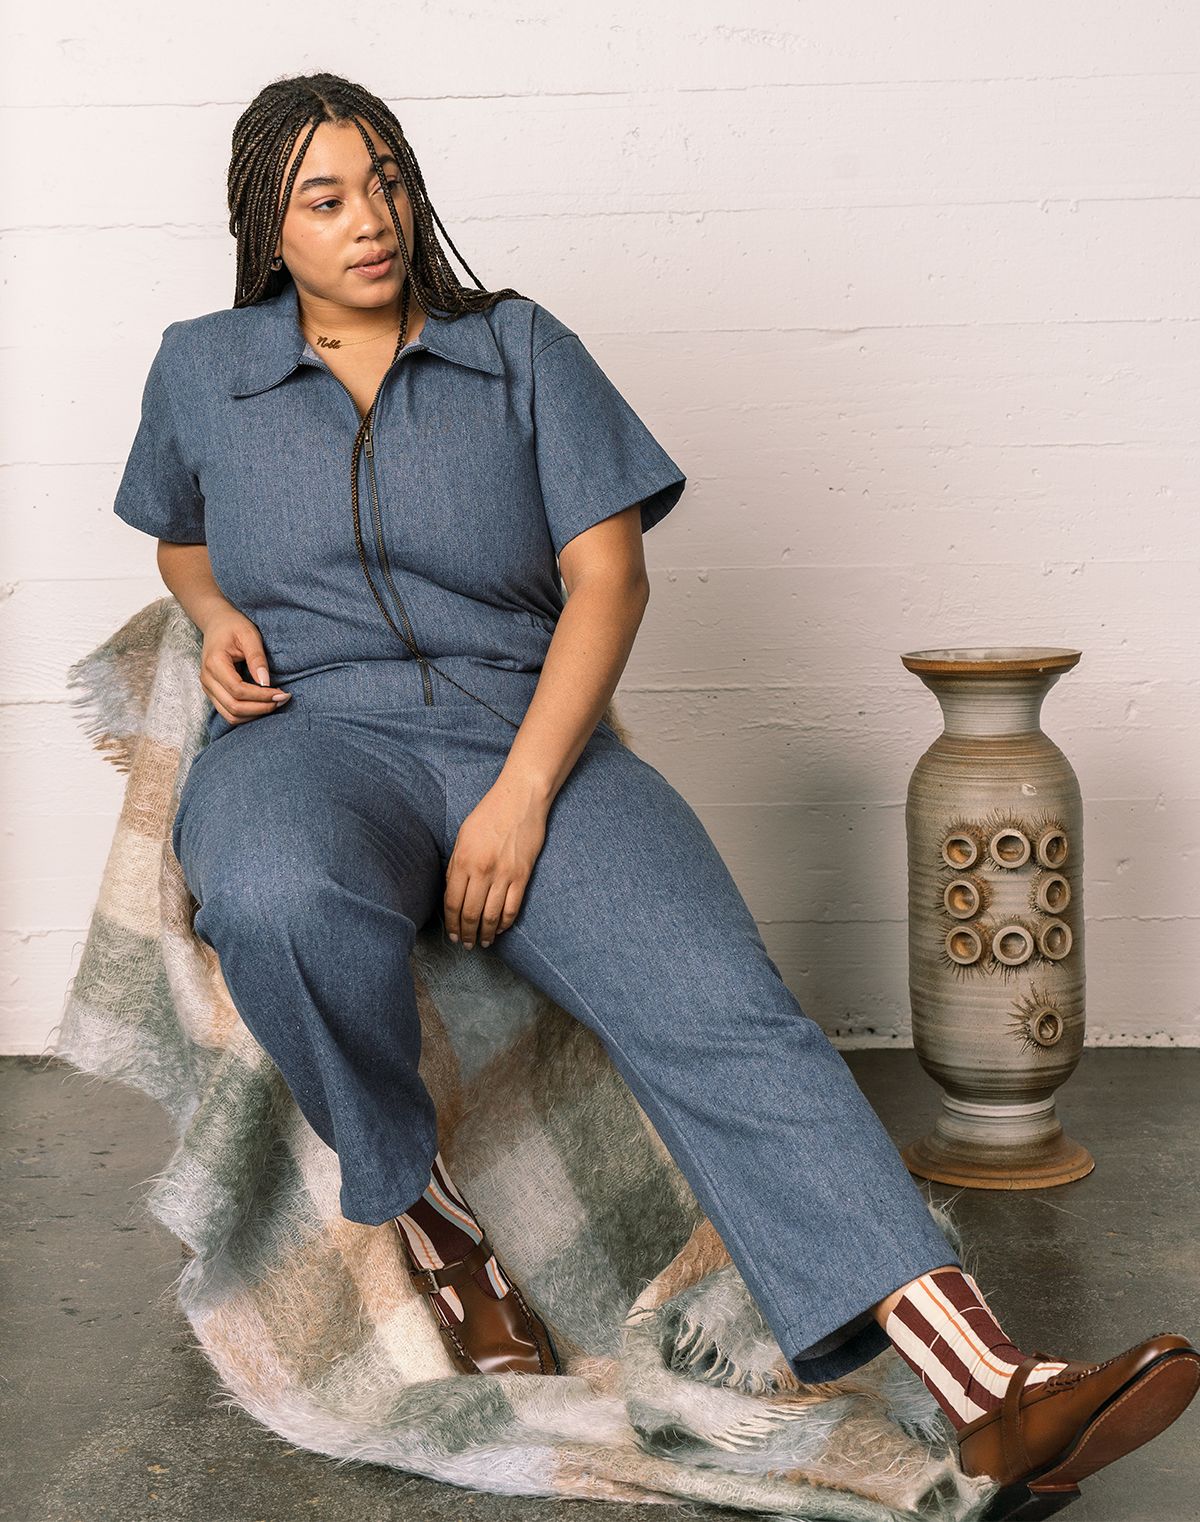 Noble's signature Utility Suit is finally available for adults to make all of your twinning jumpsuit dreams come true. Made in Peru with durable yet buttery soft GOTS certified organic Pima cotton canvas.